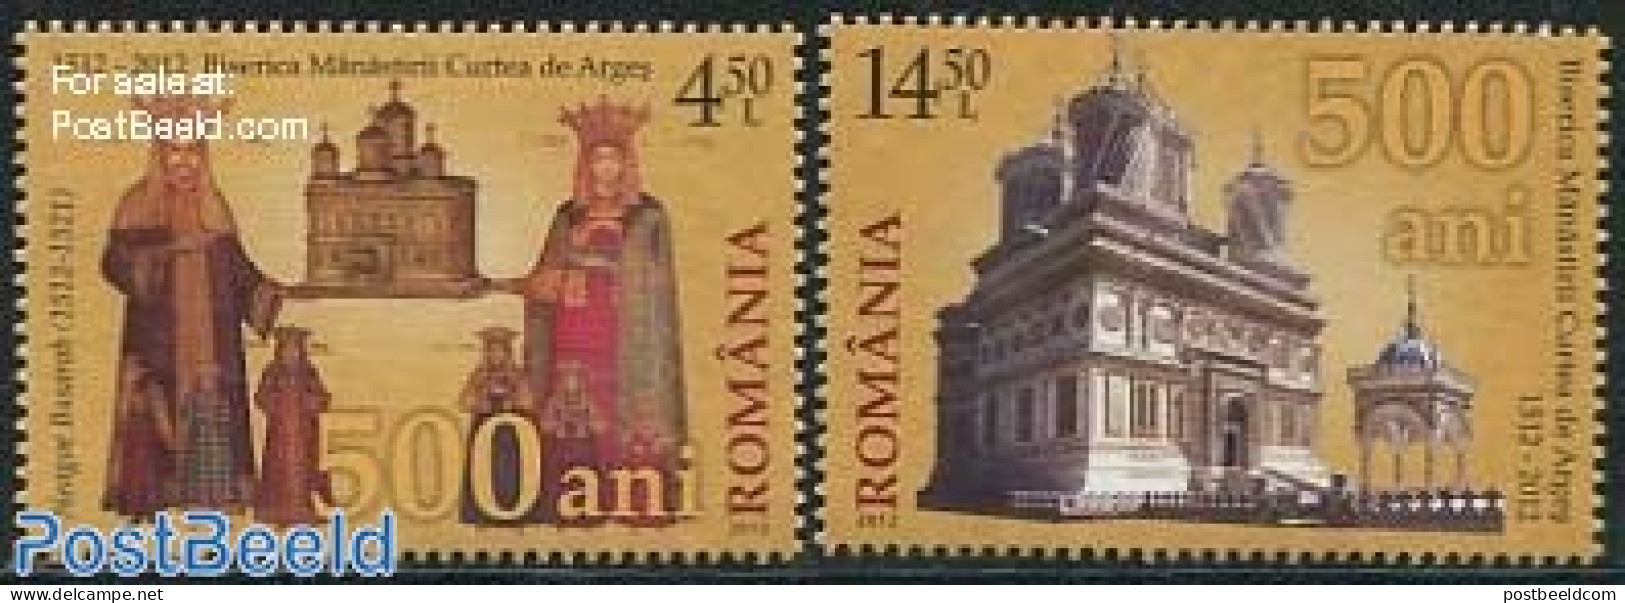 Romania 2012 500 Years Curtea De Arges 2v, Mint NH, Religion - Churches, Temples, Mosques, Synagogues - Cloisters & Ab.. - Ungebraucht